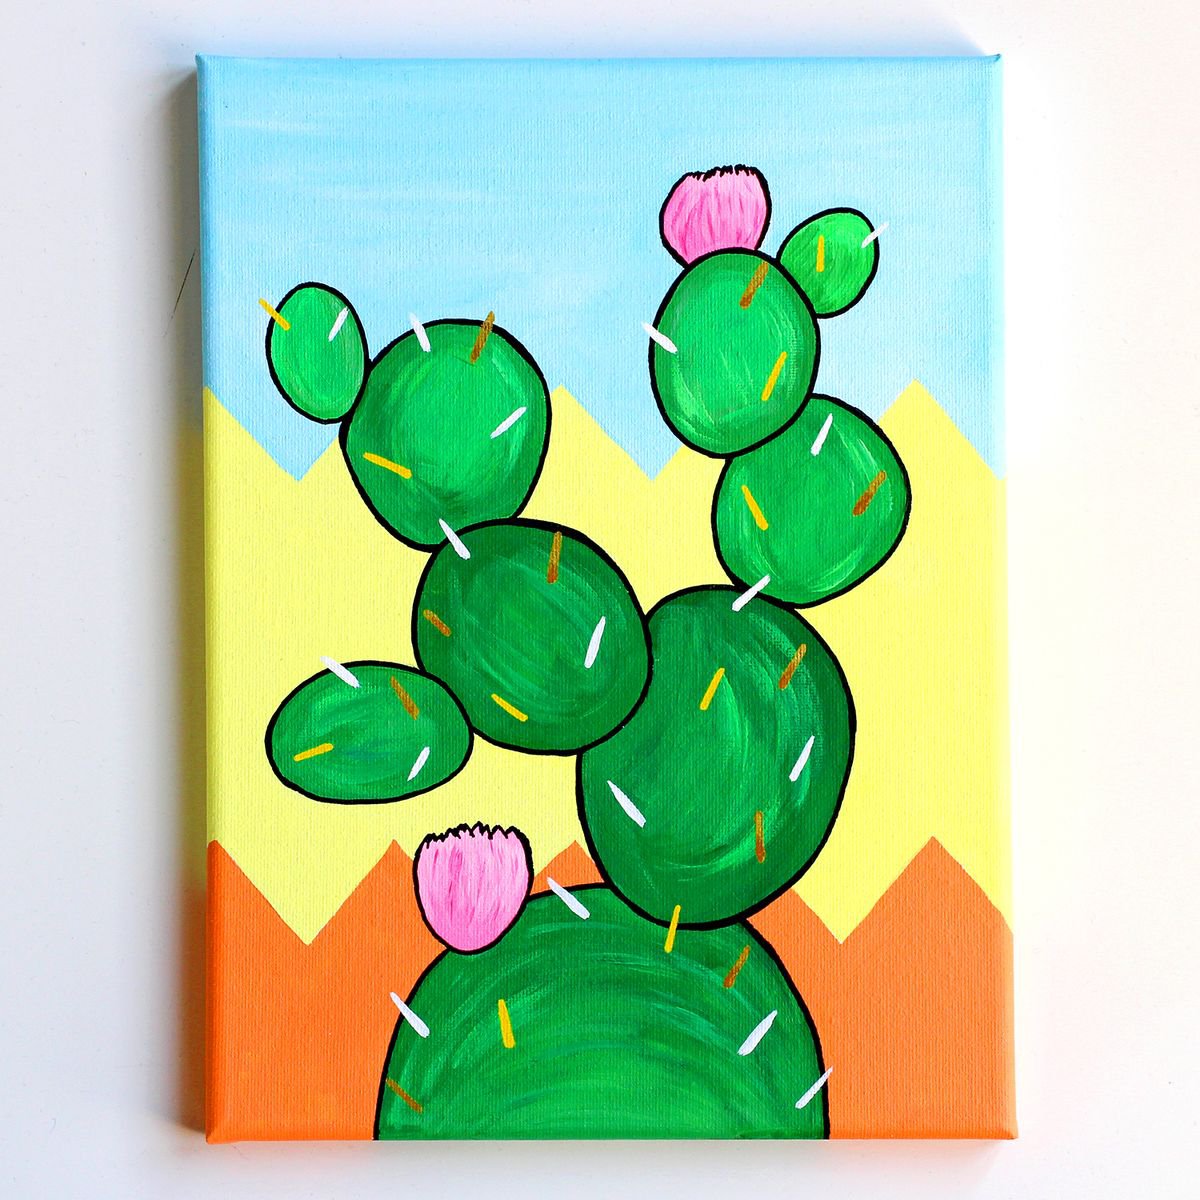 Cactus Number Three - Pop Art Painting On Canvas by Ian Viggars